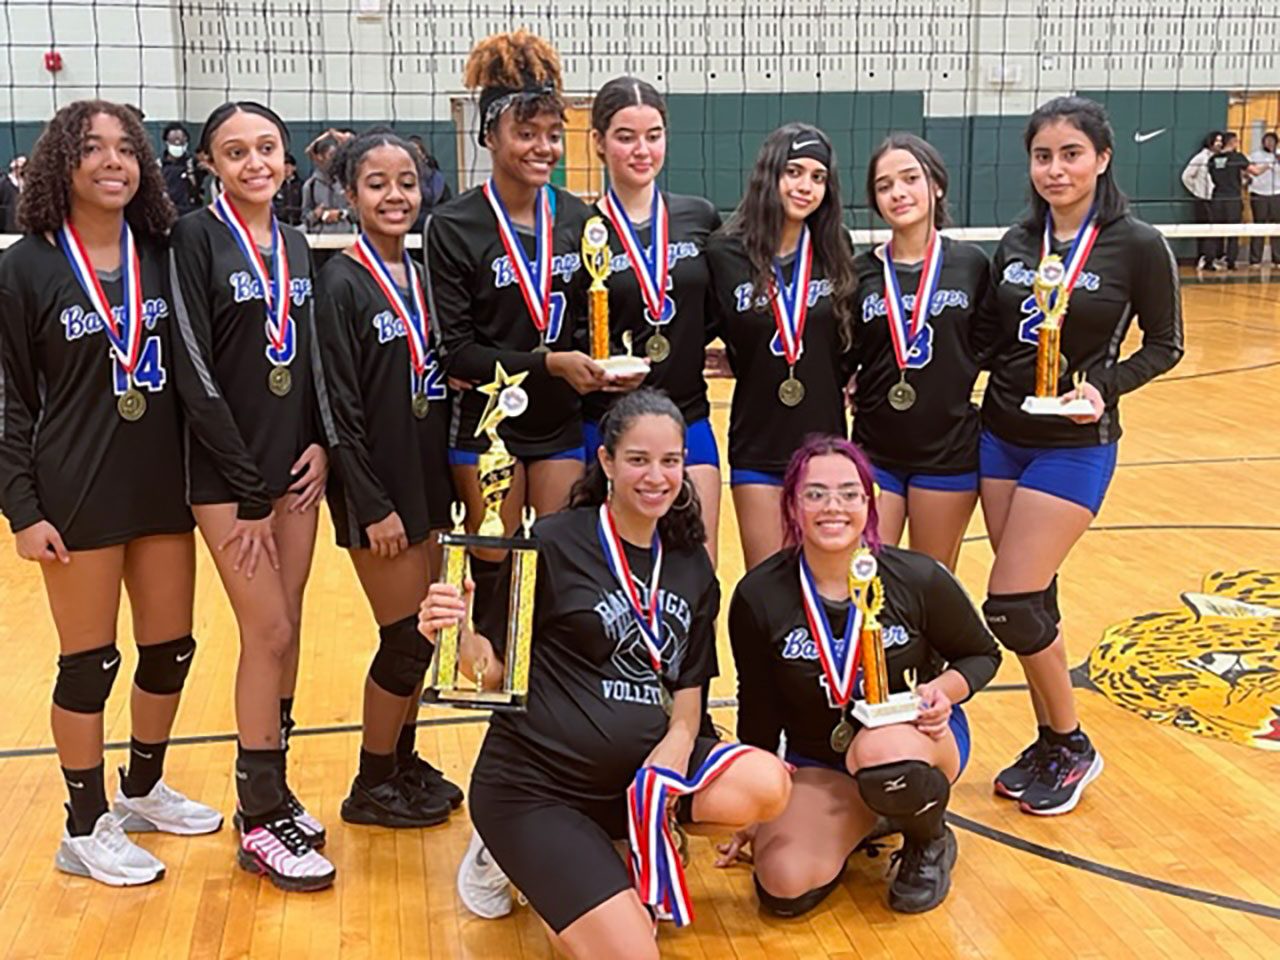 Congratulations to Barringer girls volleyball team!!!<br>Barringer defeated Science Park 2-1 in a hard fought match to capture their first district championship in girls volleyball!  Go Lady Blue Bears!!